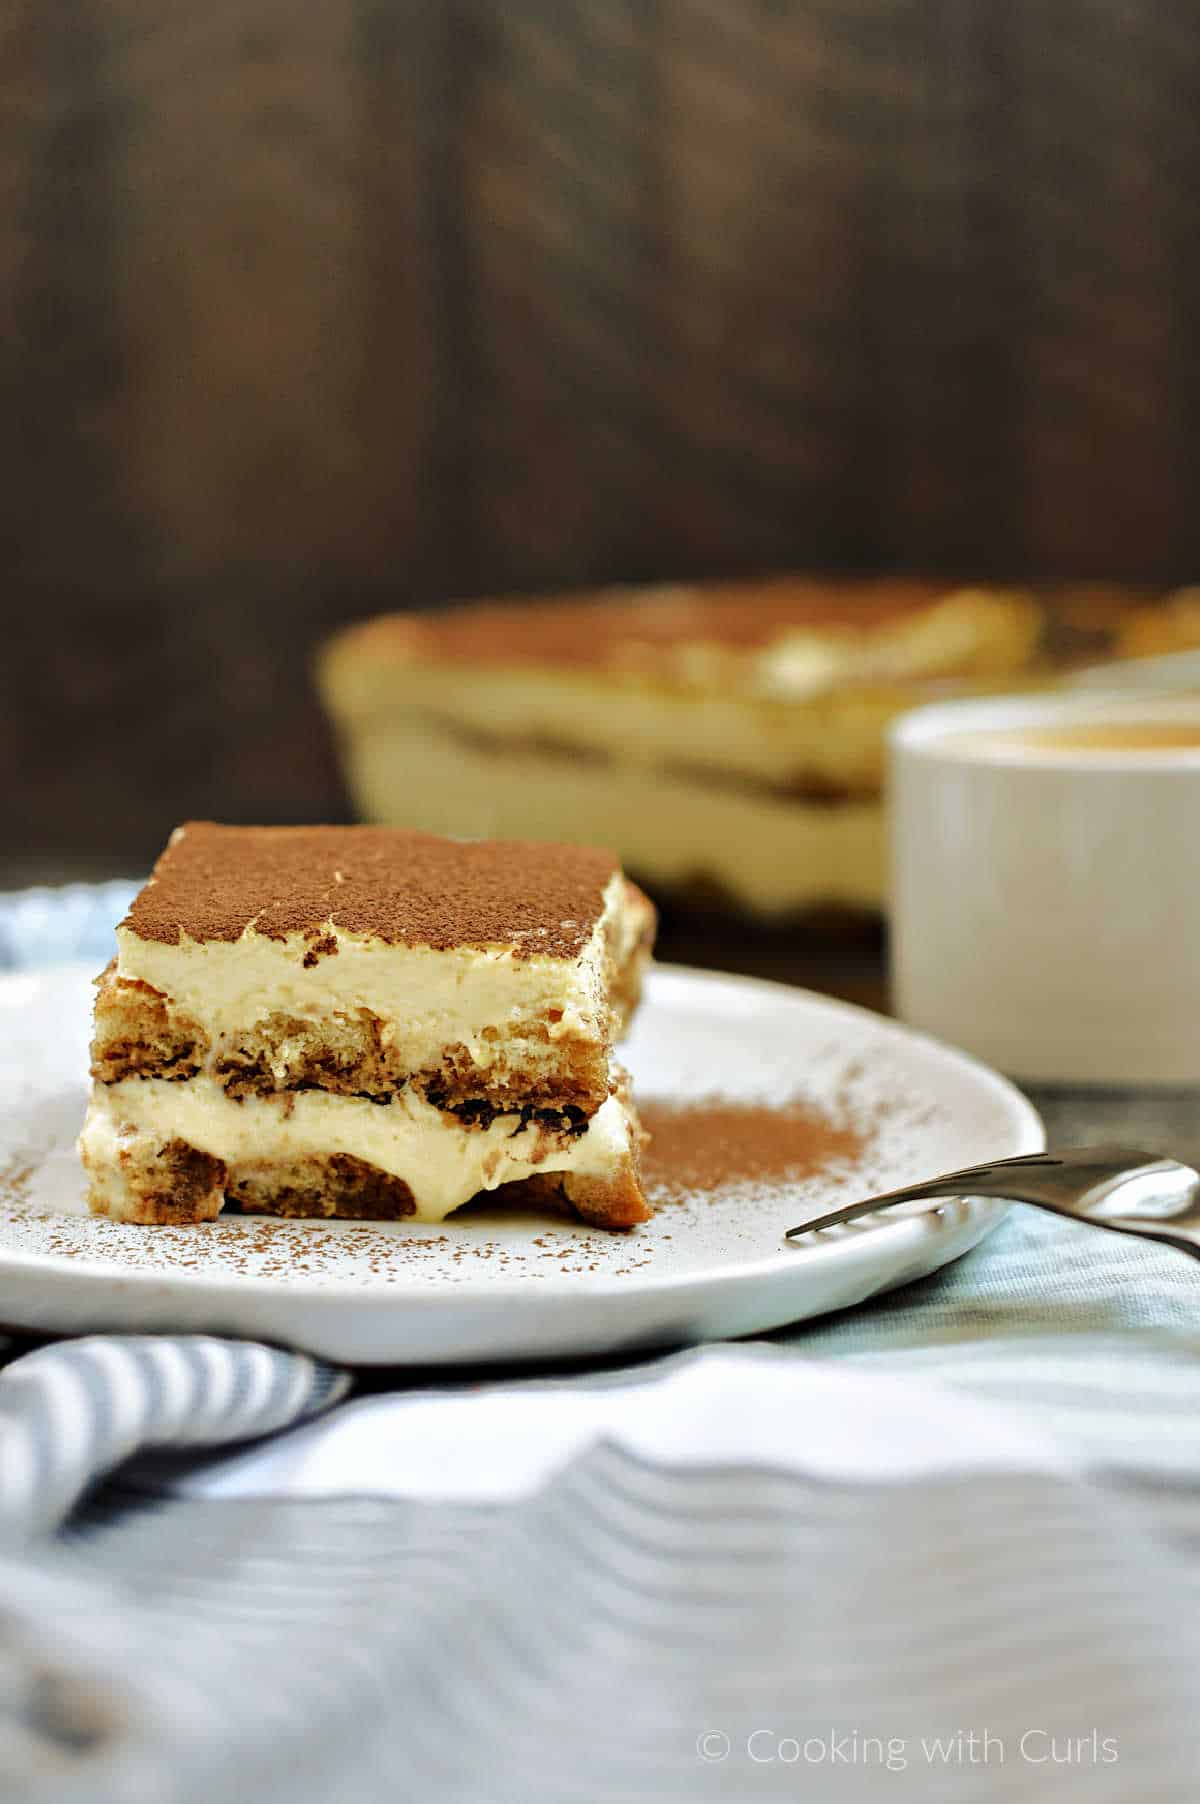 A slice of layered tiramisu on a plate with a pan of tiramisu and cup of coffee in the background.